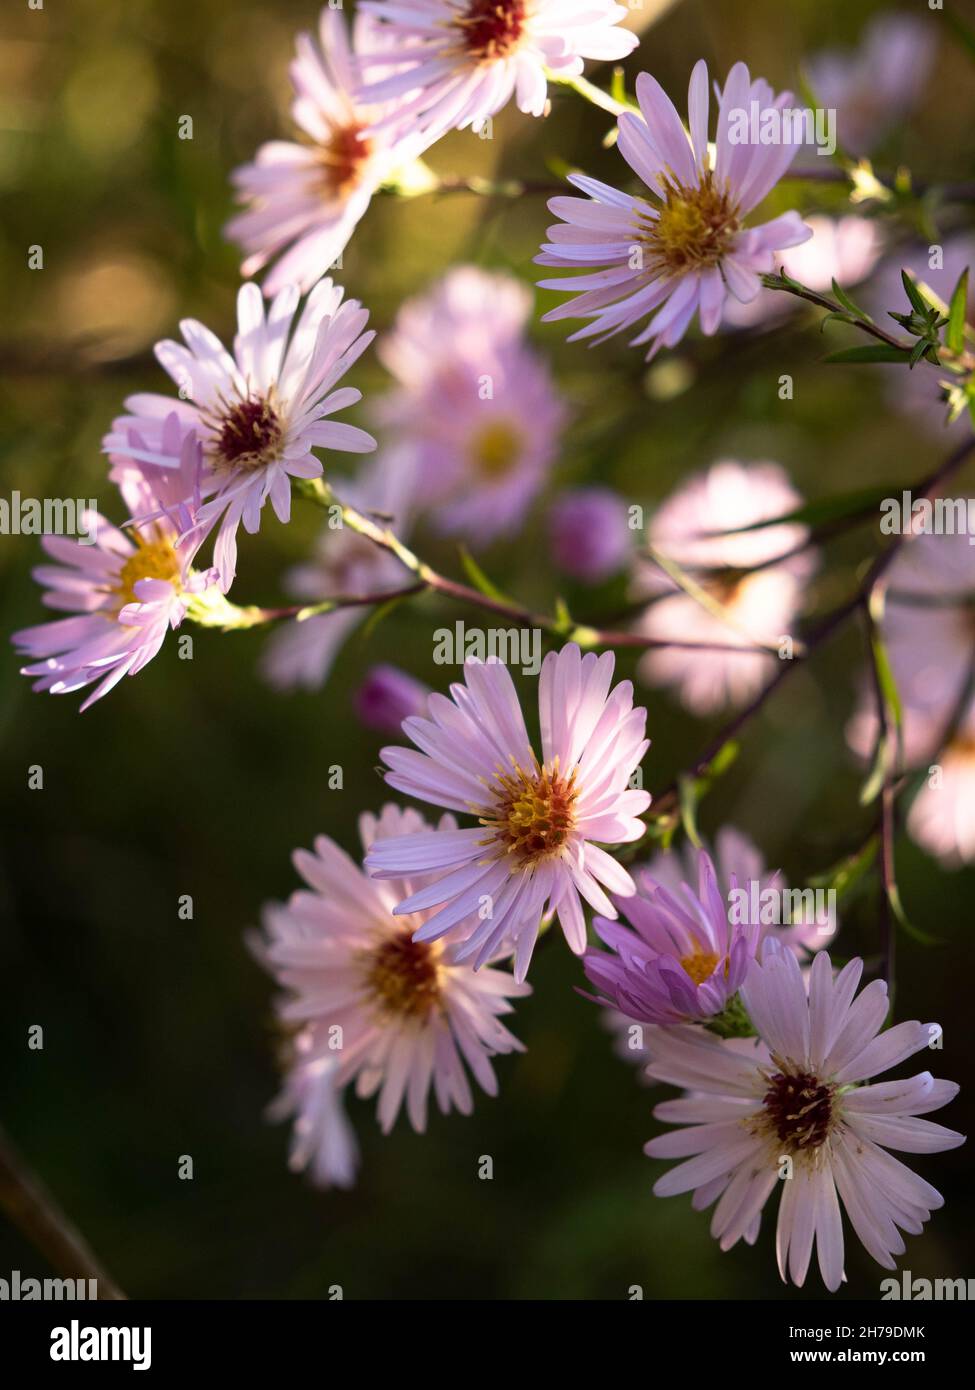 Aster flowers in backlight Stock Photo